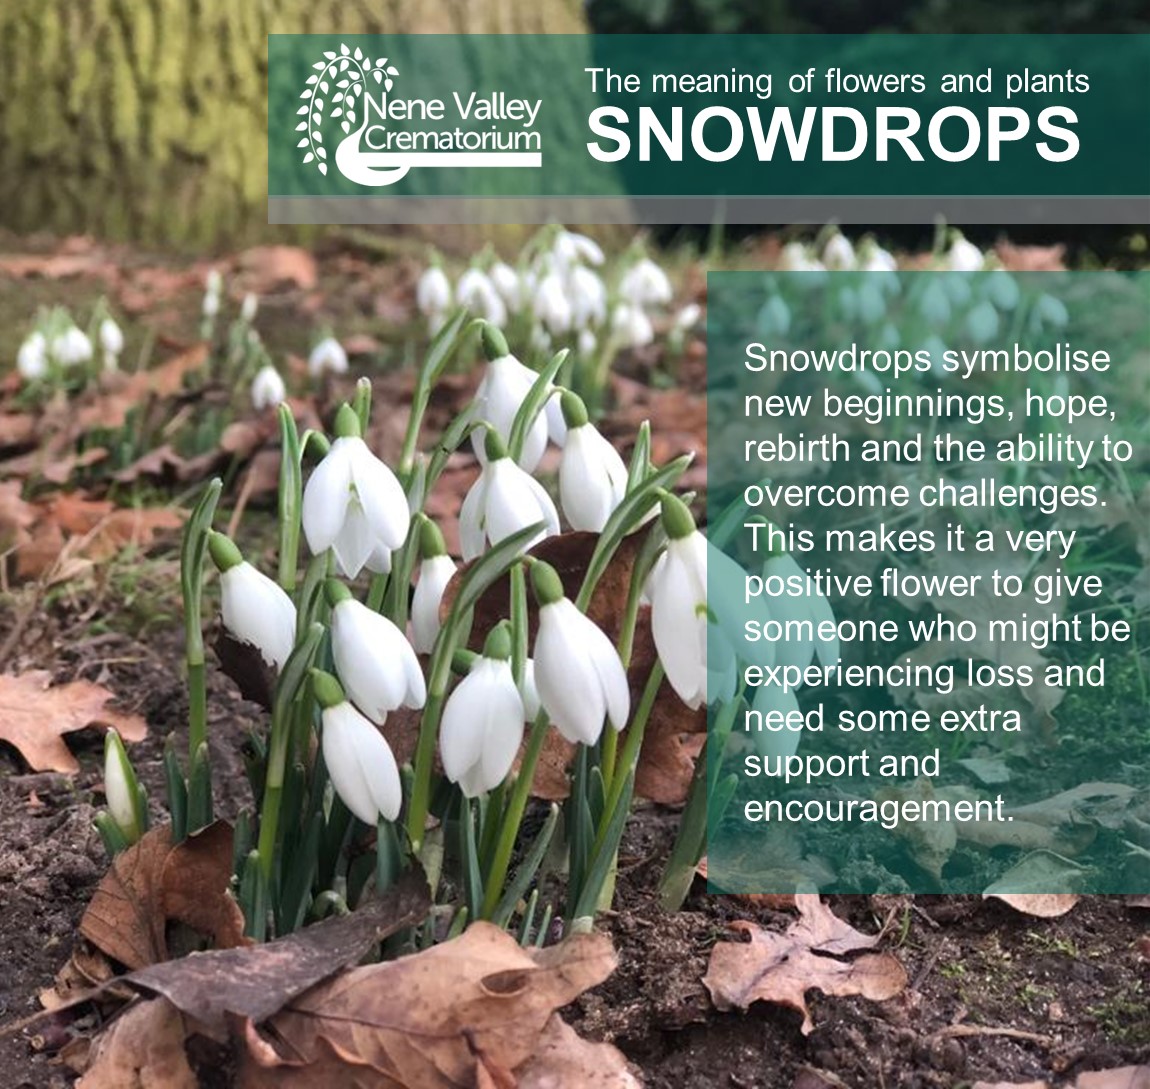 Snowdrops symbolise new beginnings, hope, rebirth and the ability to overcome challenges. This makes it a very positive flower to give someone who might be experiencing loss and need some extra support and encouragement.

#meaningofflowers #symbolism #snowdrops #nenevalley